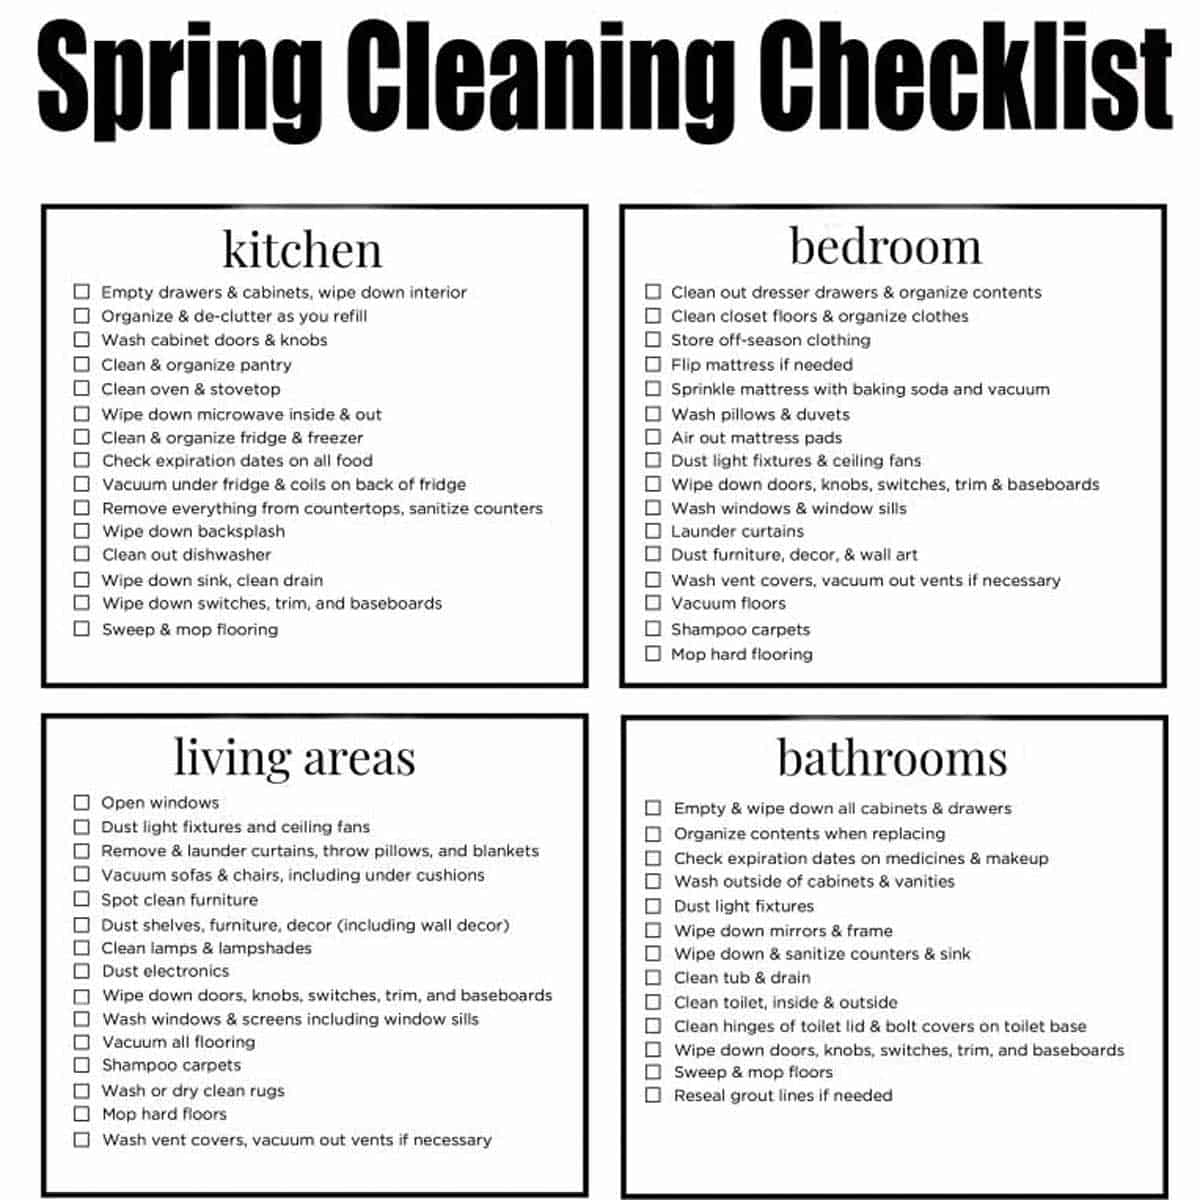 The Ultimate Step-by-Step Bathroom Cleaning Guide + Printable Checklist